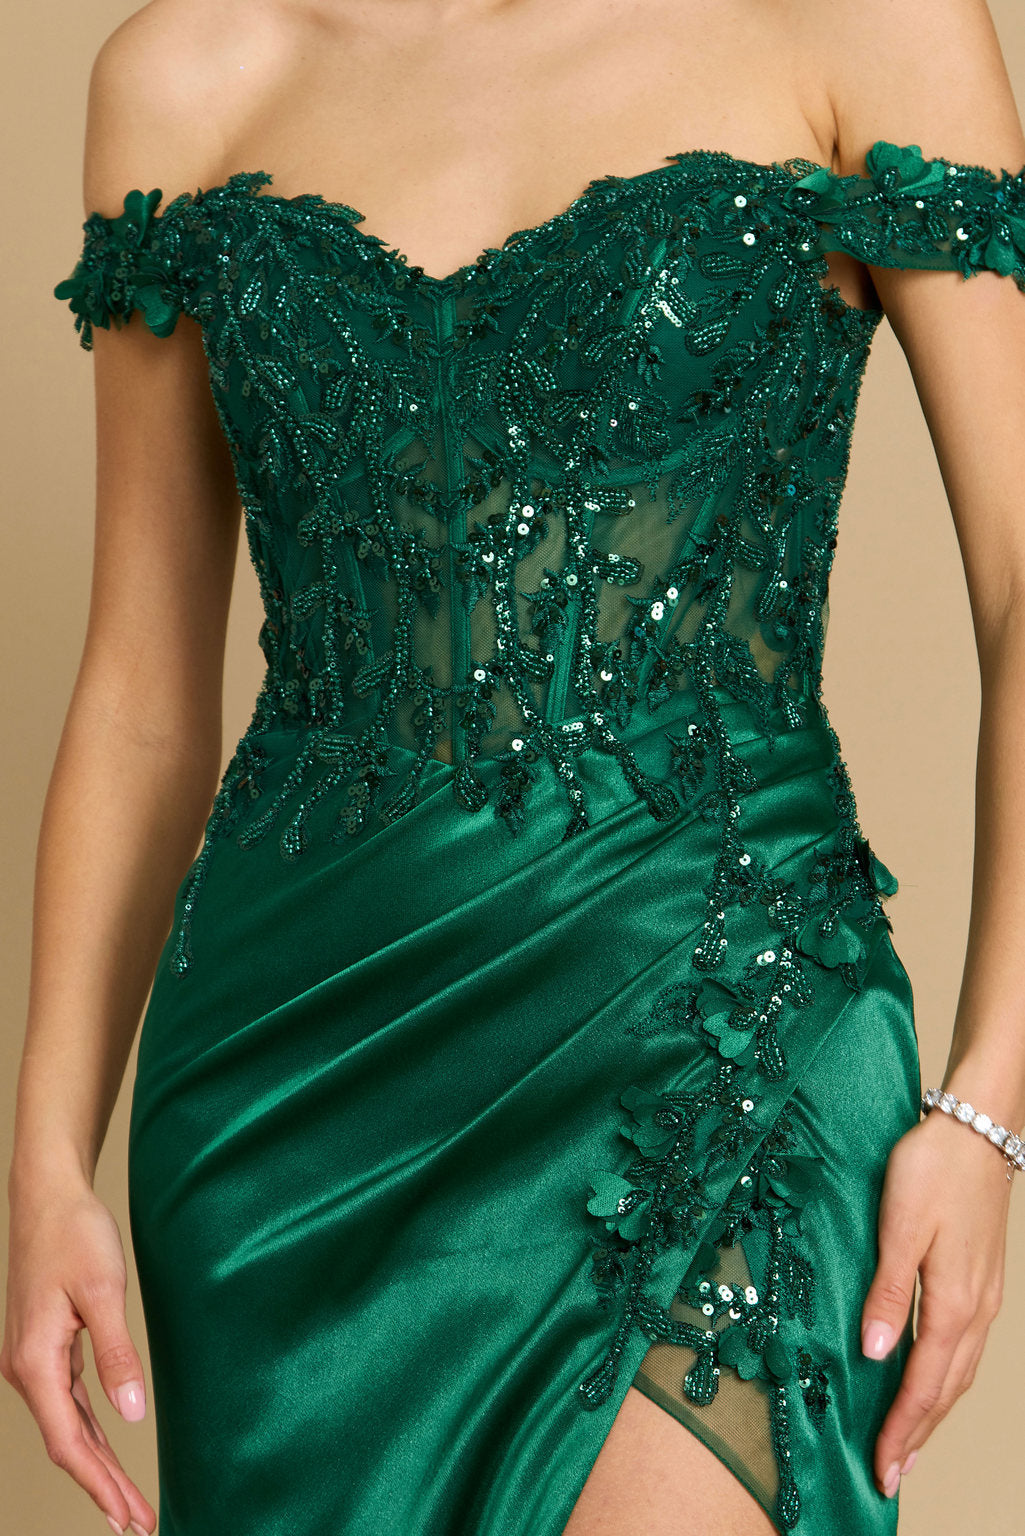 Prom Dresses Fitted Corset Off the Shoulder Formal Prom Dress Emerald